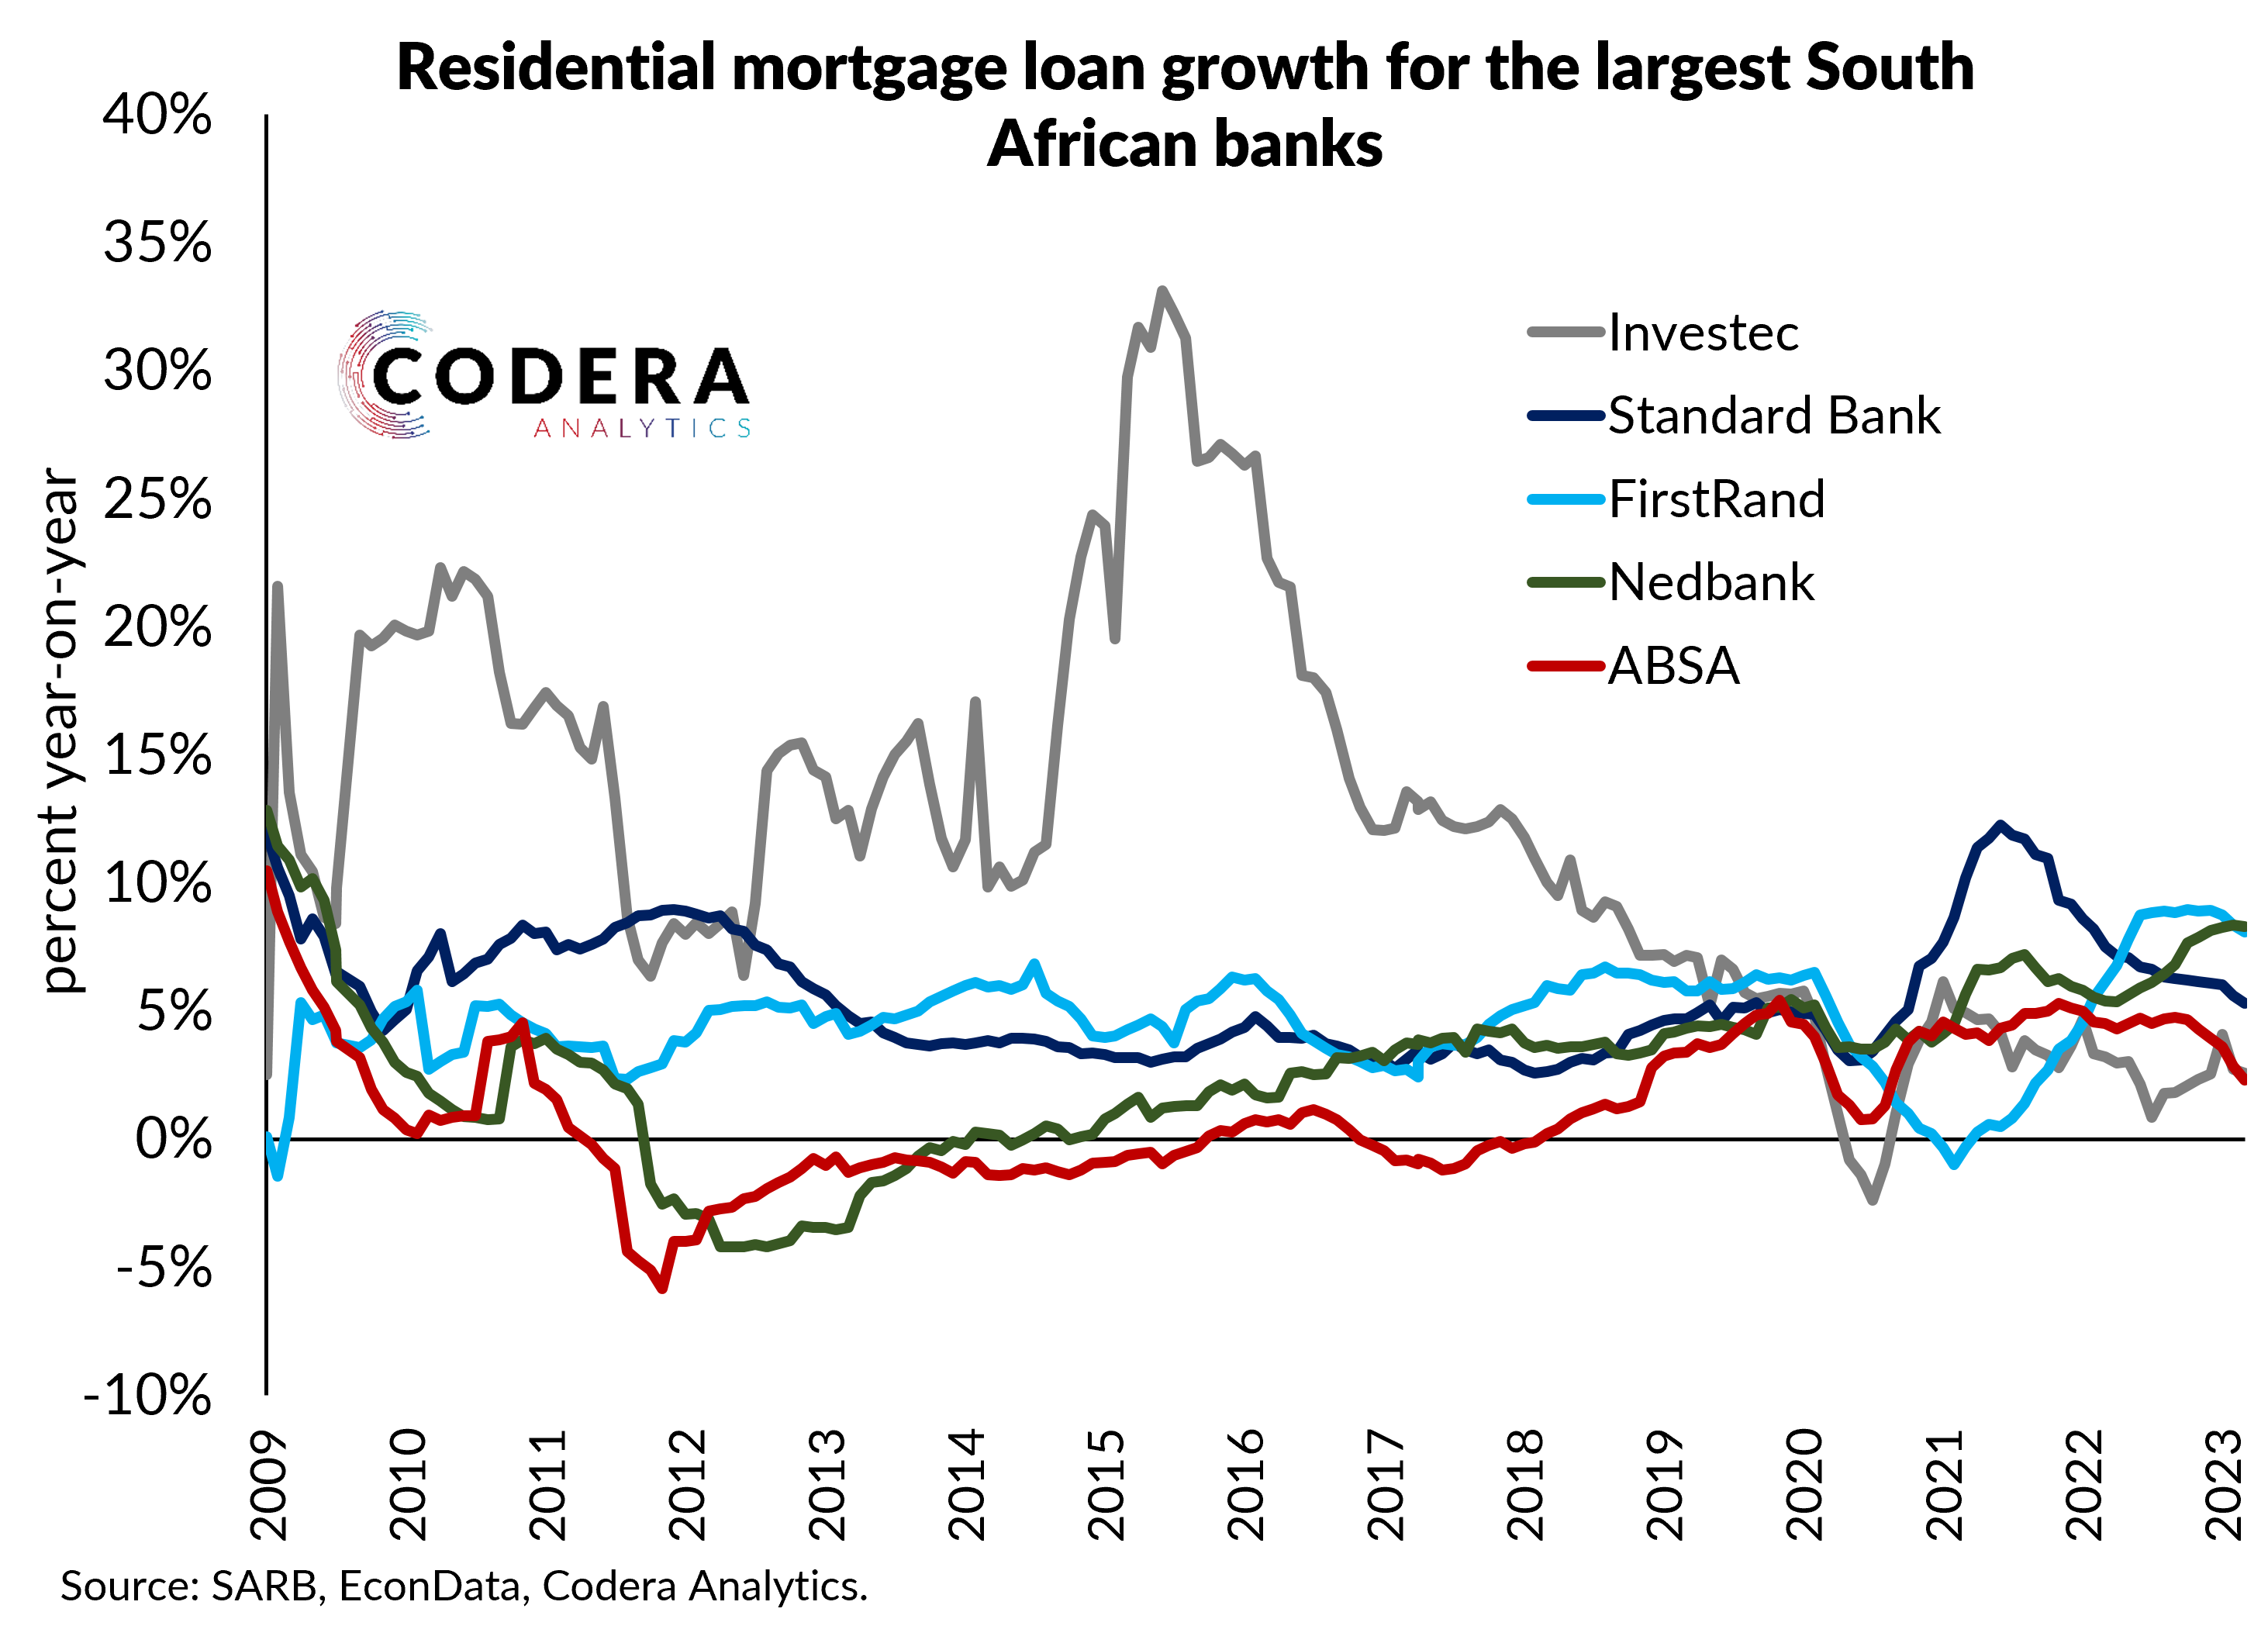 Mortgage loan growth for South African banks